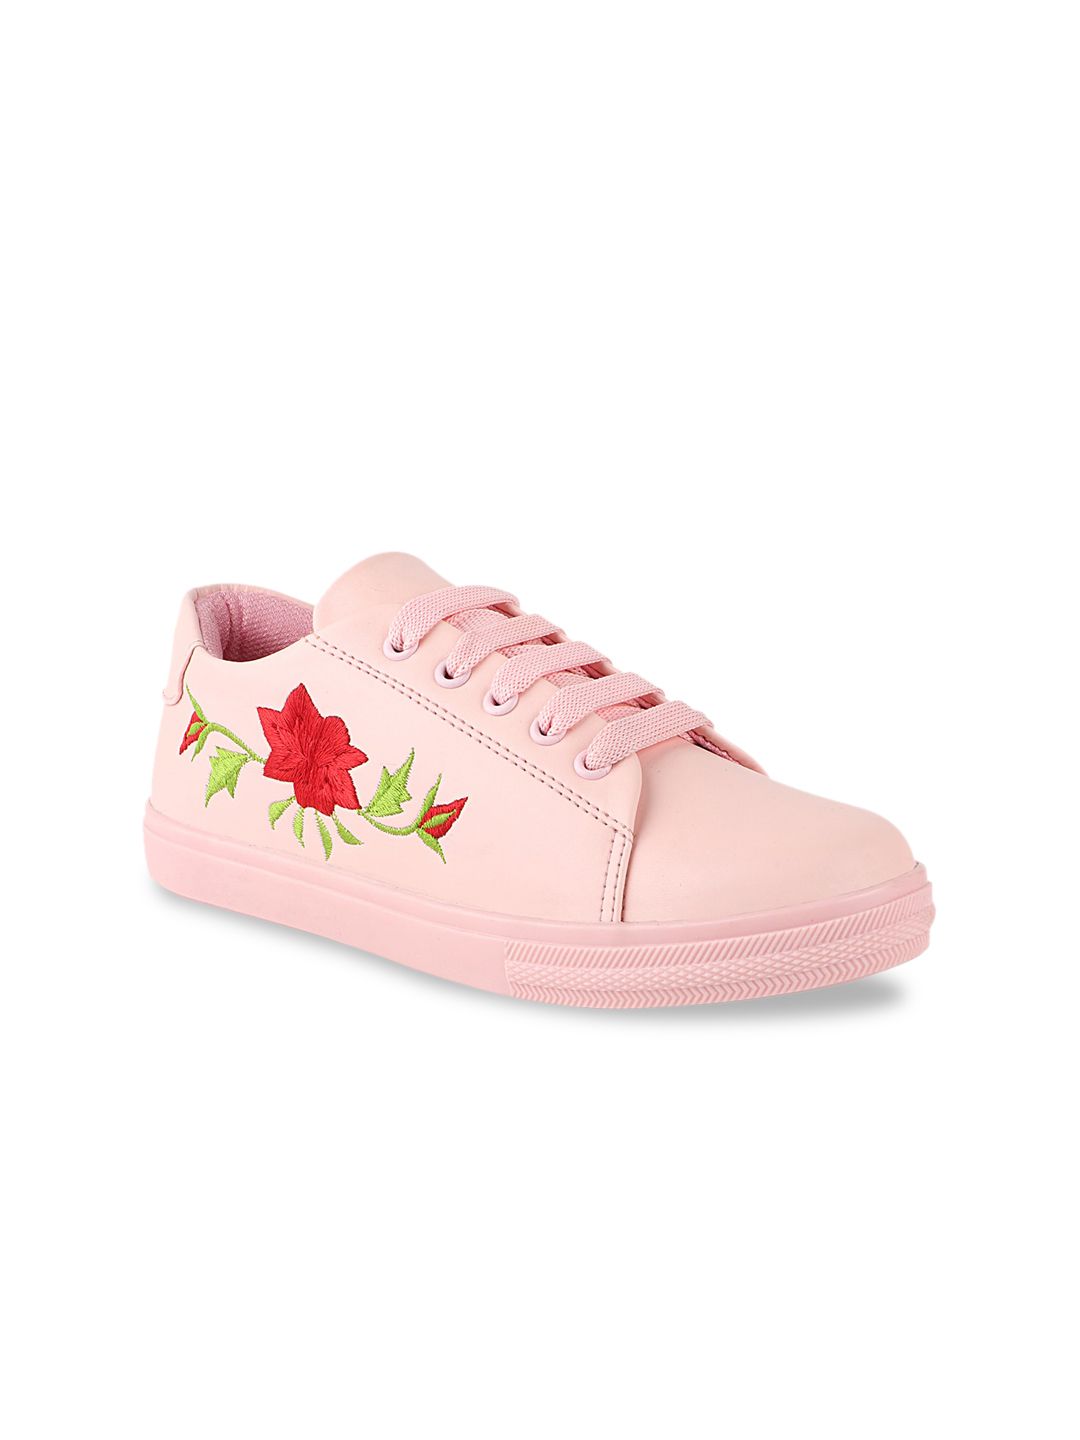 Shoetopia Woman Pink Embroidered Sneakers Price in India